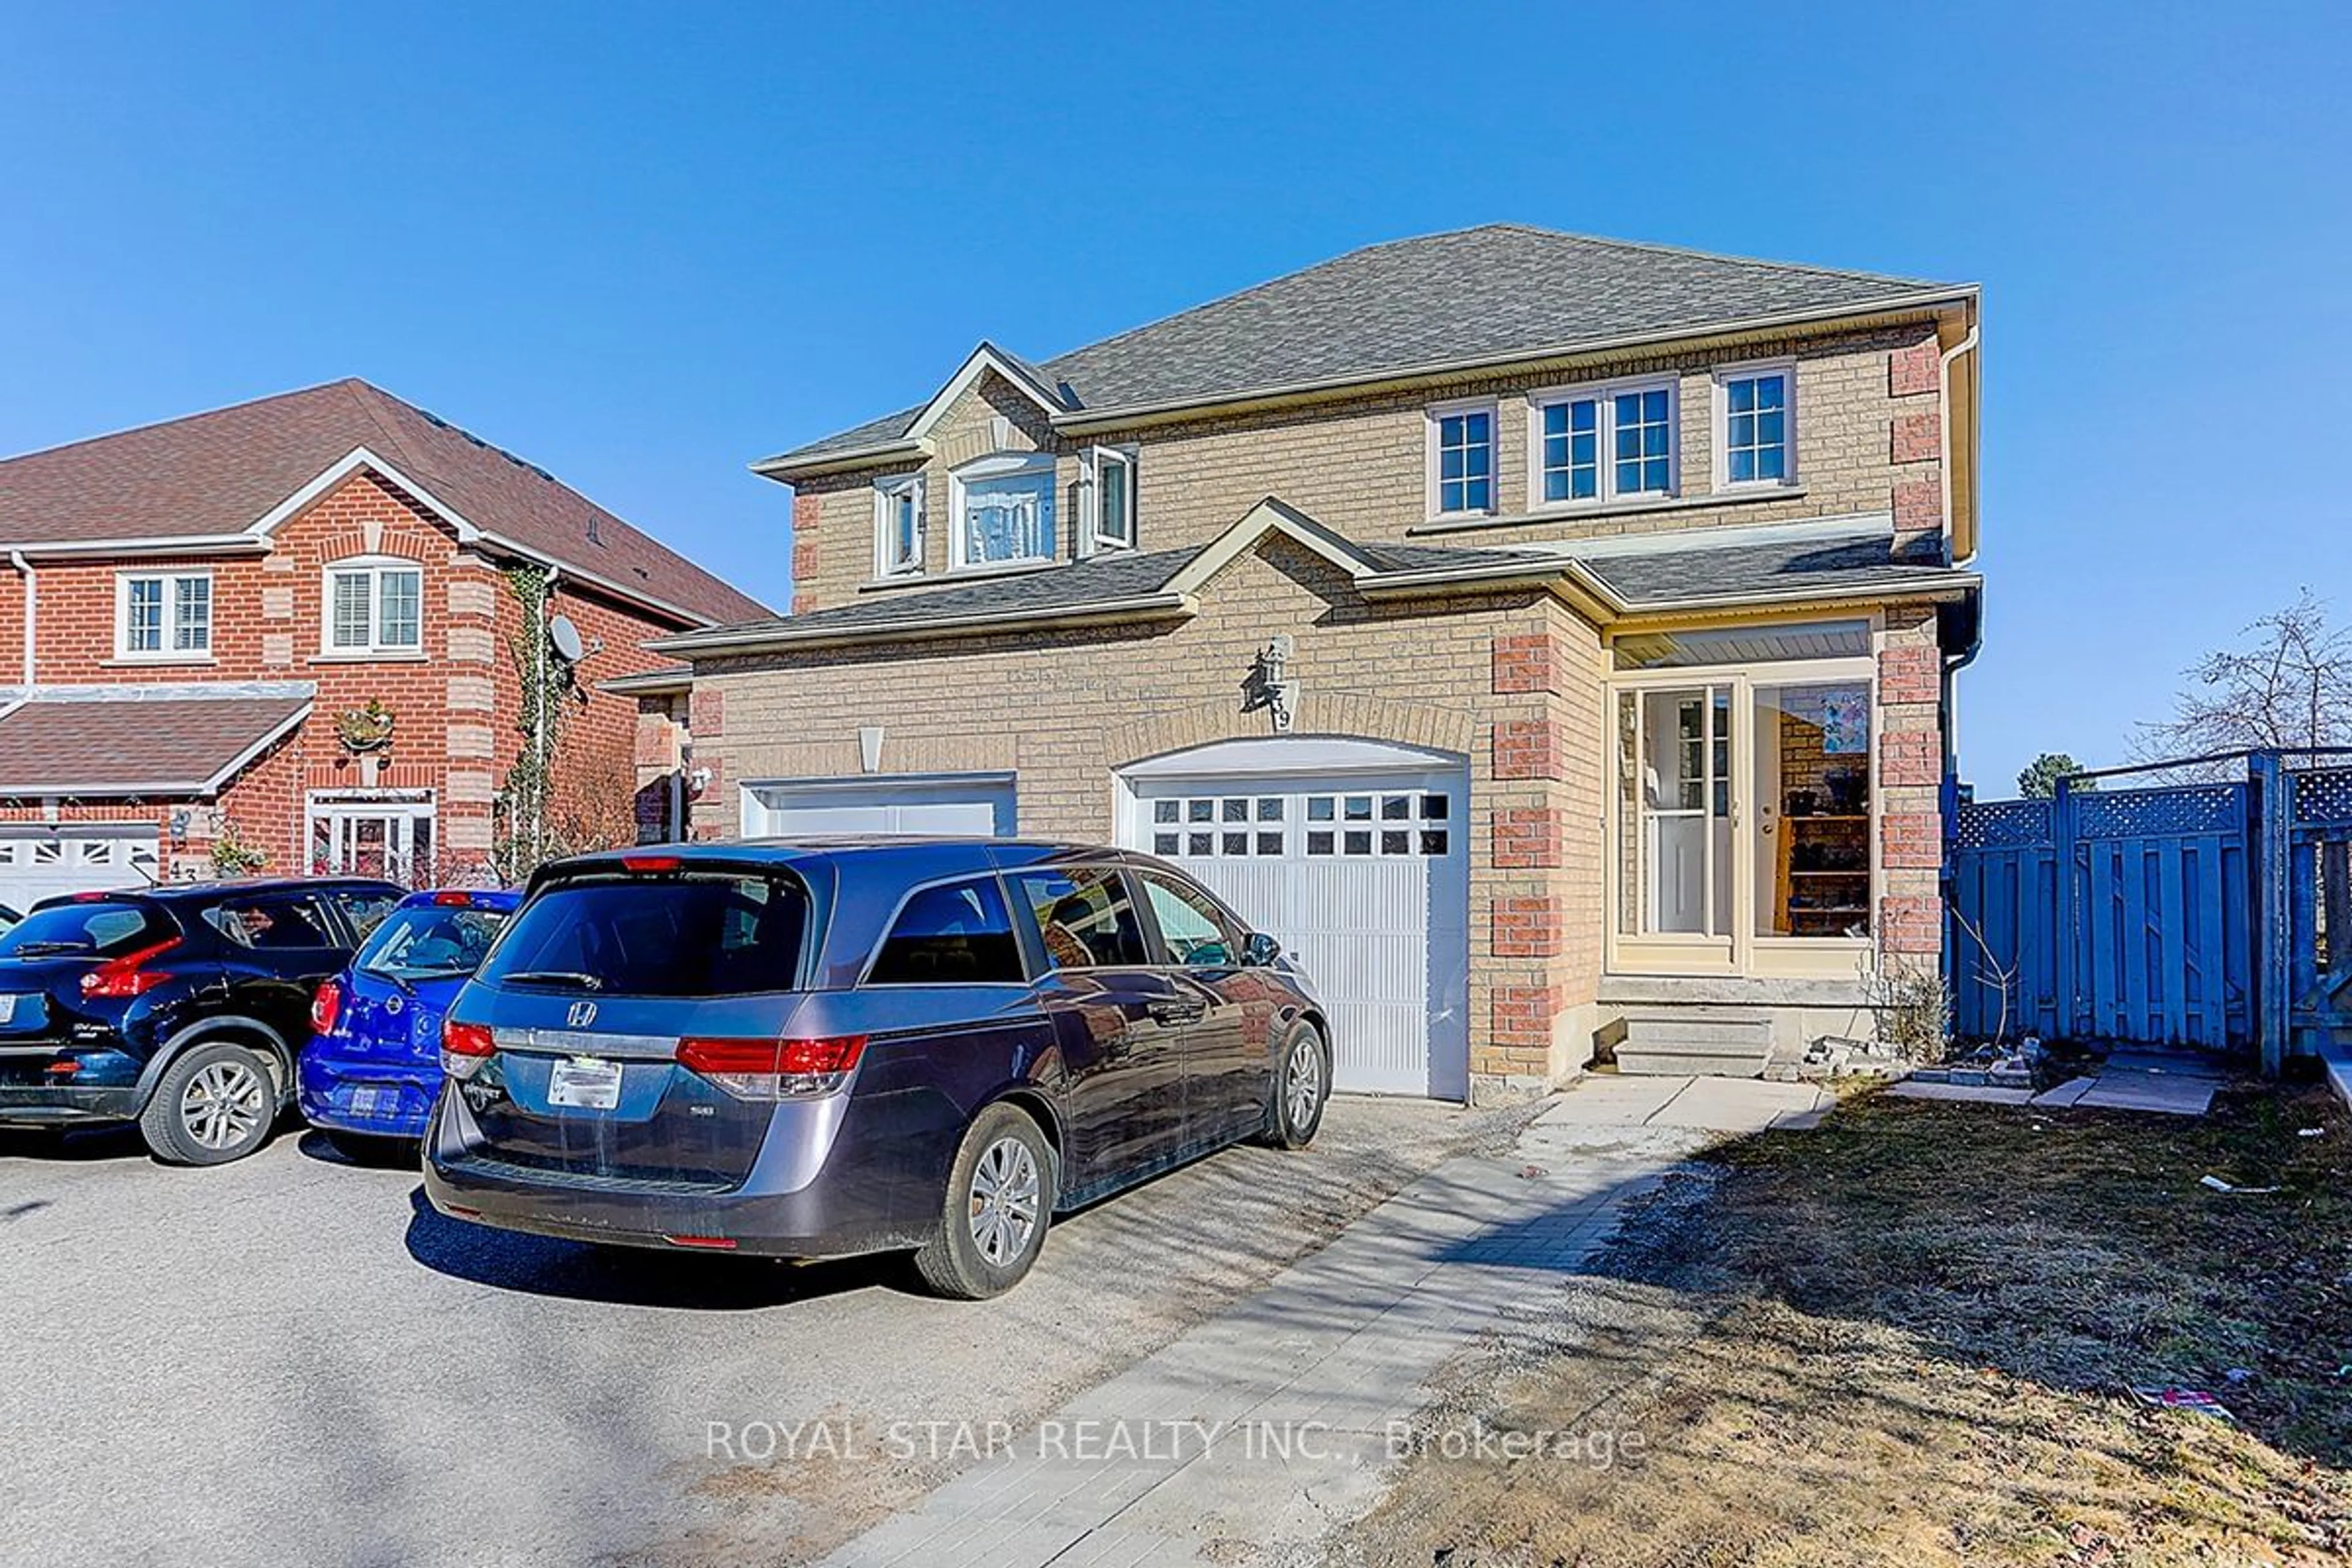 Home with brick exterior material for 39 Caruso Dr, Brampton Ontario L6Y 5B2